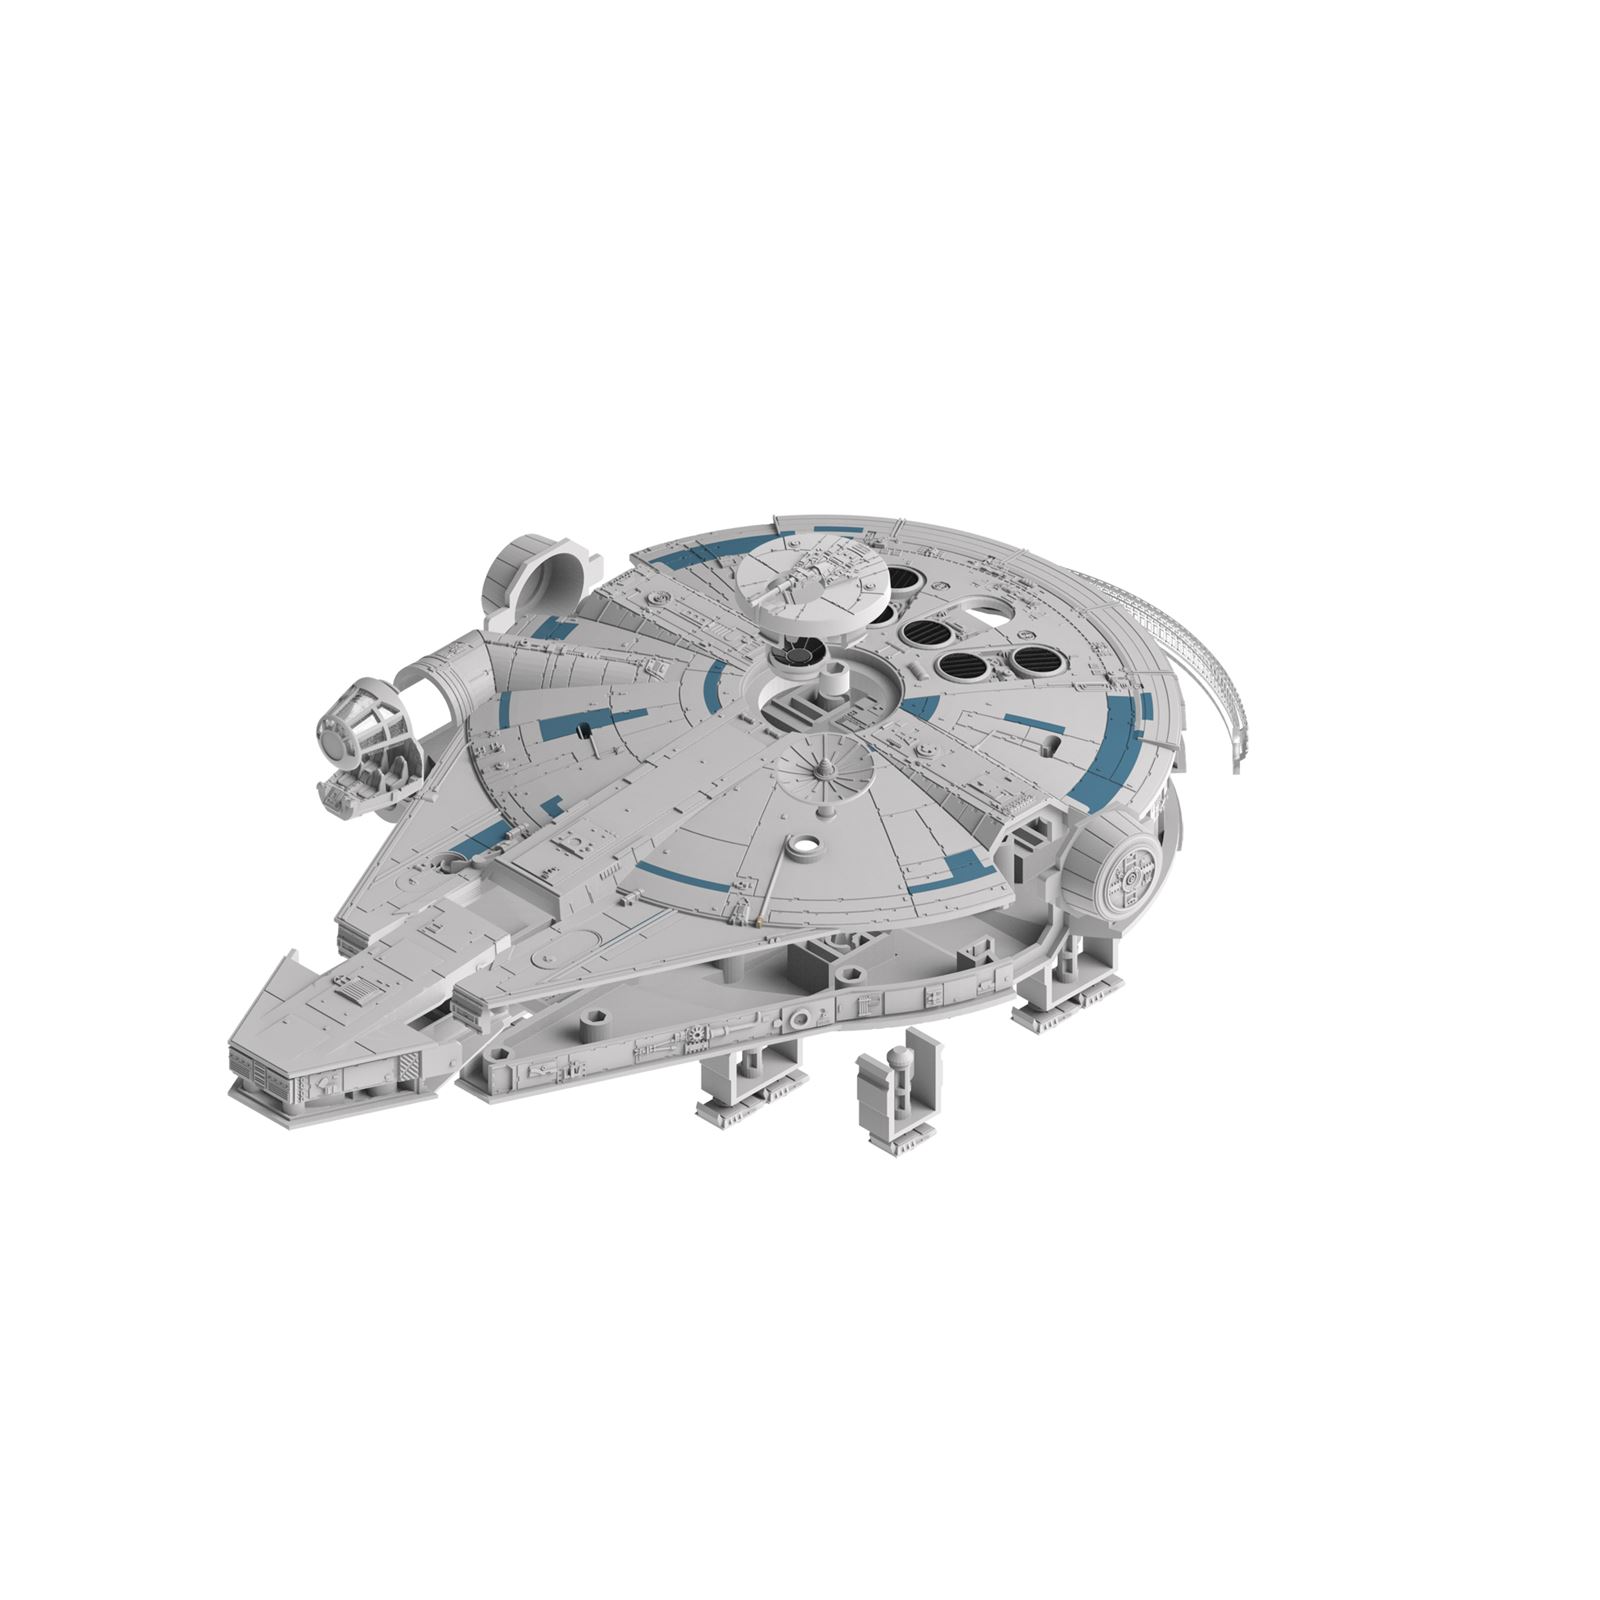 Build & Play "Star Wars Millennium Falcon Han Solo" with New Tool - Imagen 5